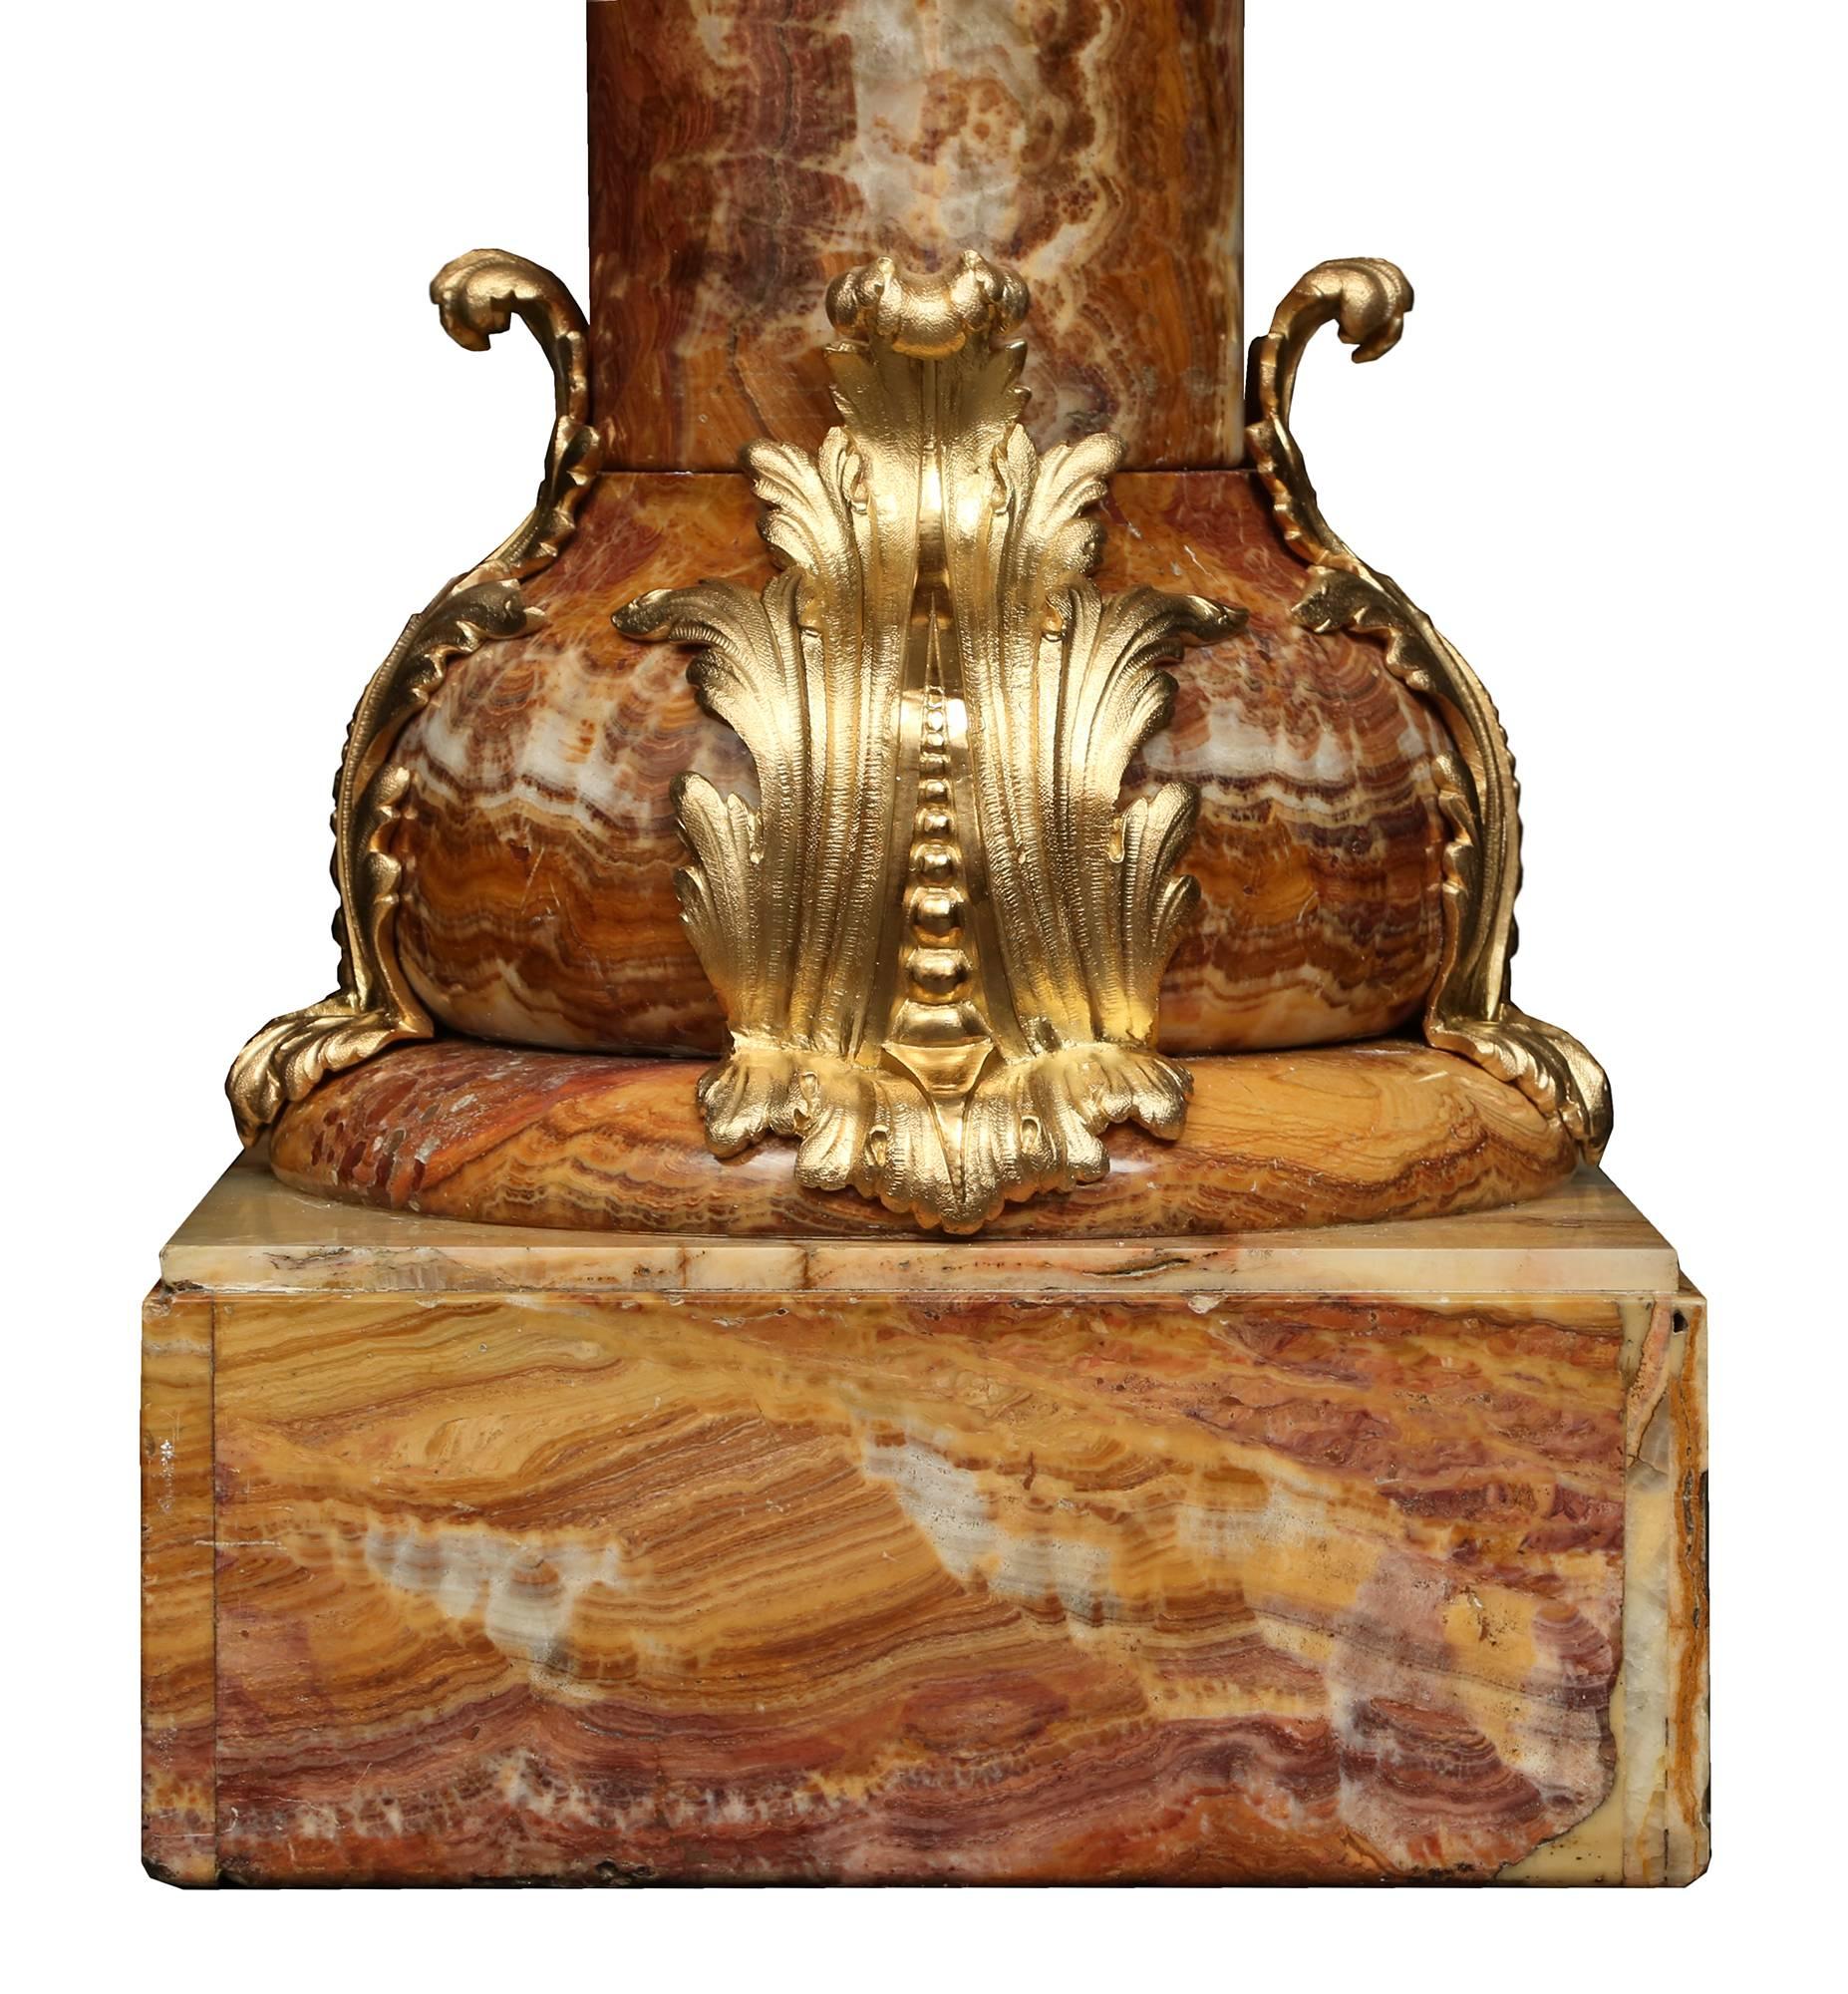 French 19th Century Belle Époque Period Onyx and Ormolu-Mounted Pedestals 2